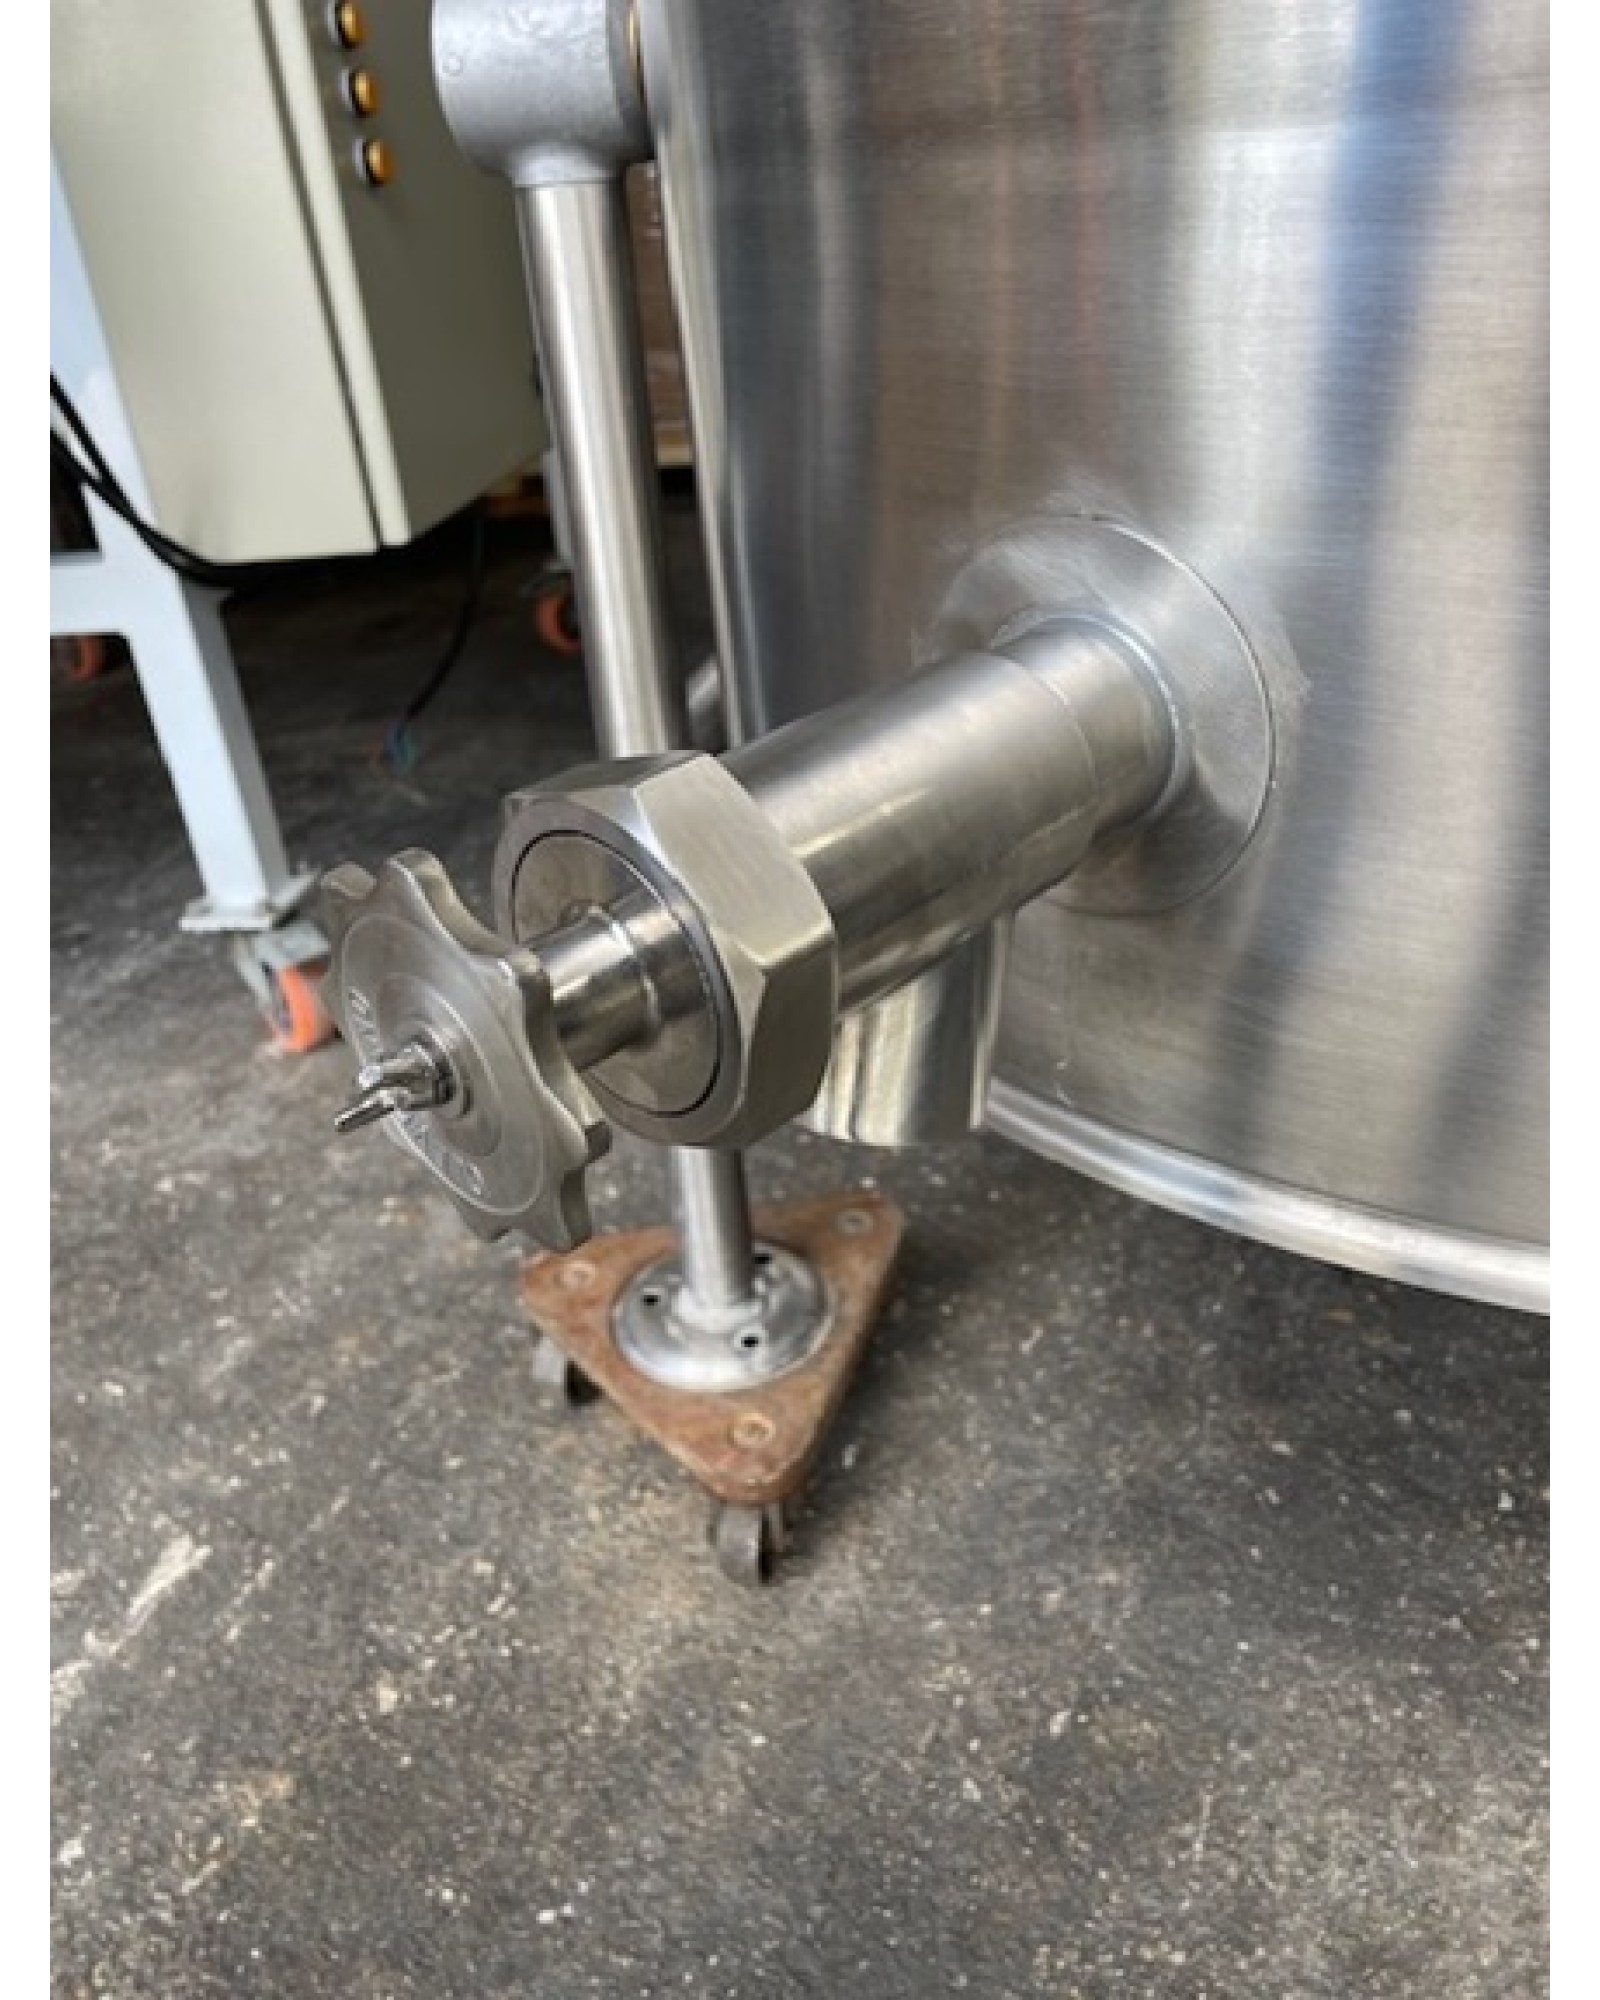 Cleveland 40 Gallon Tilting Kettle (USED)